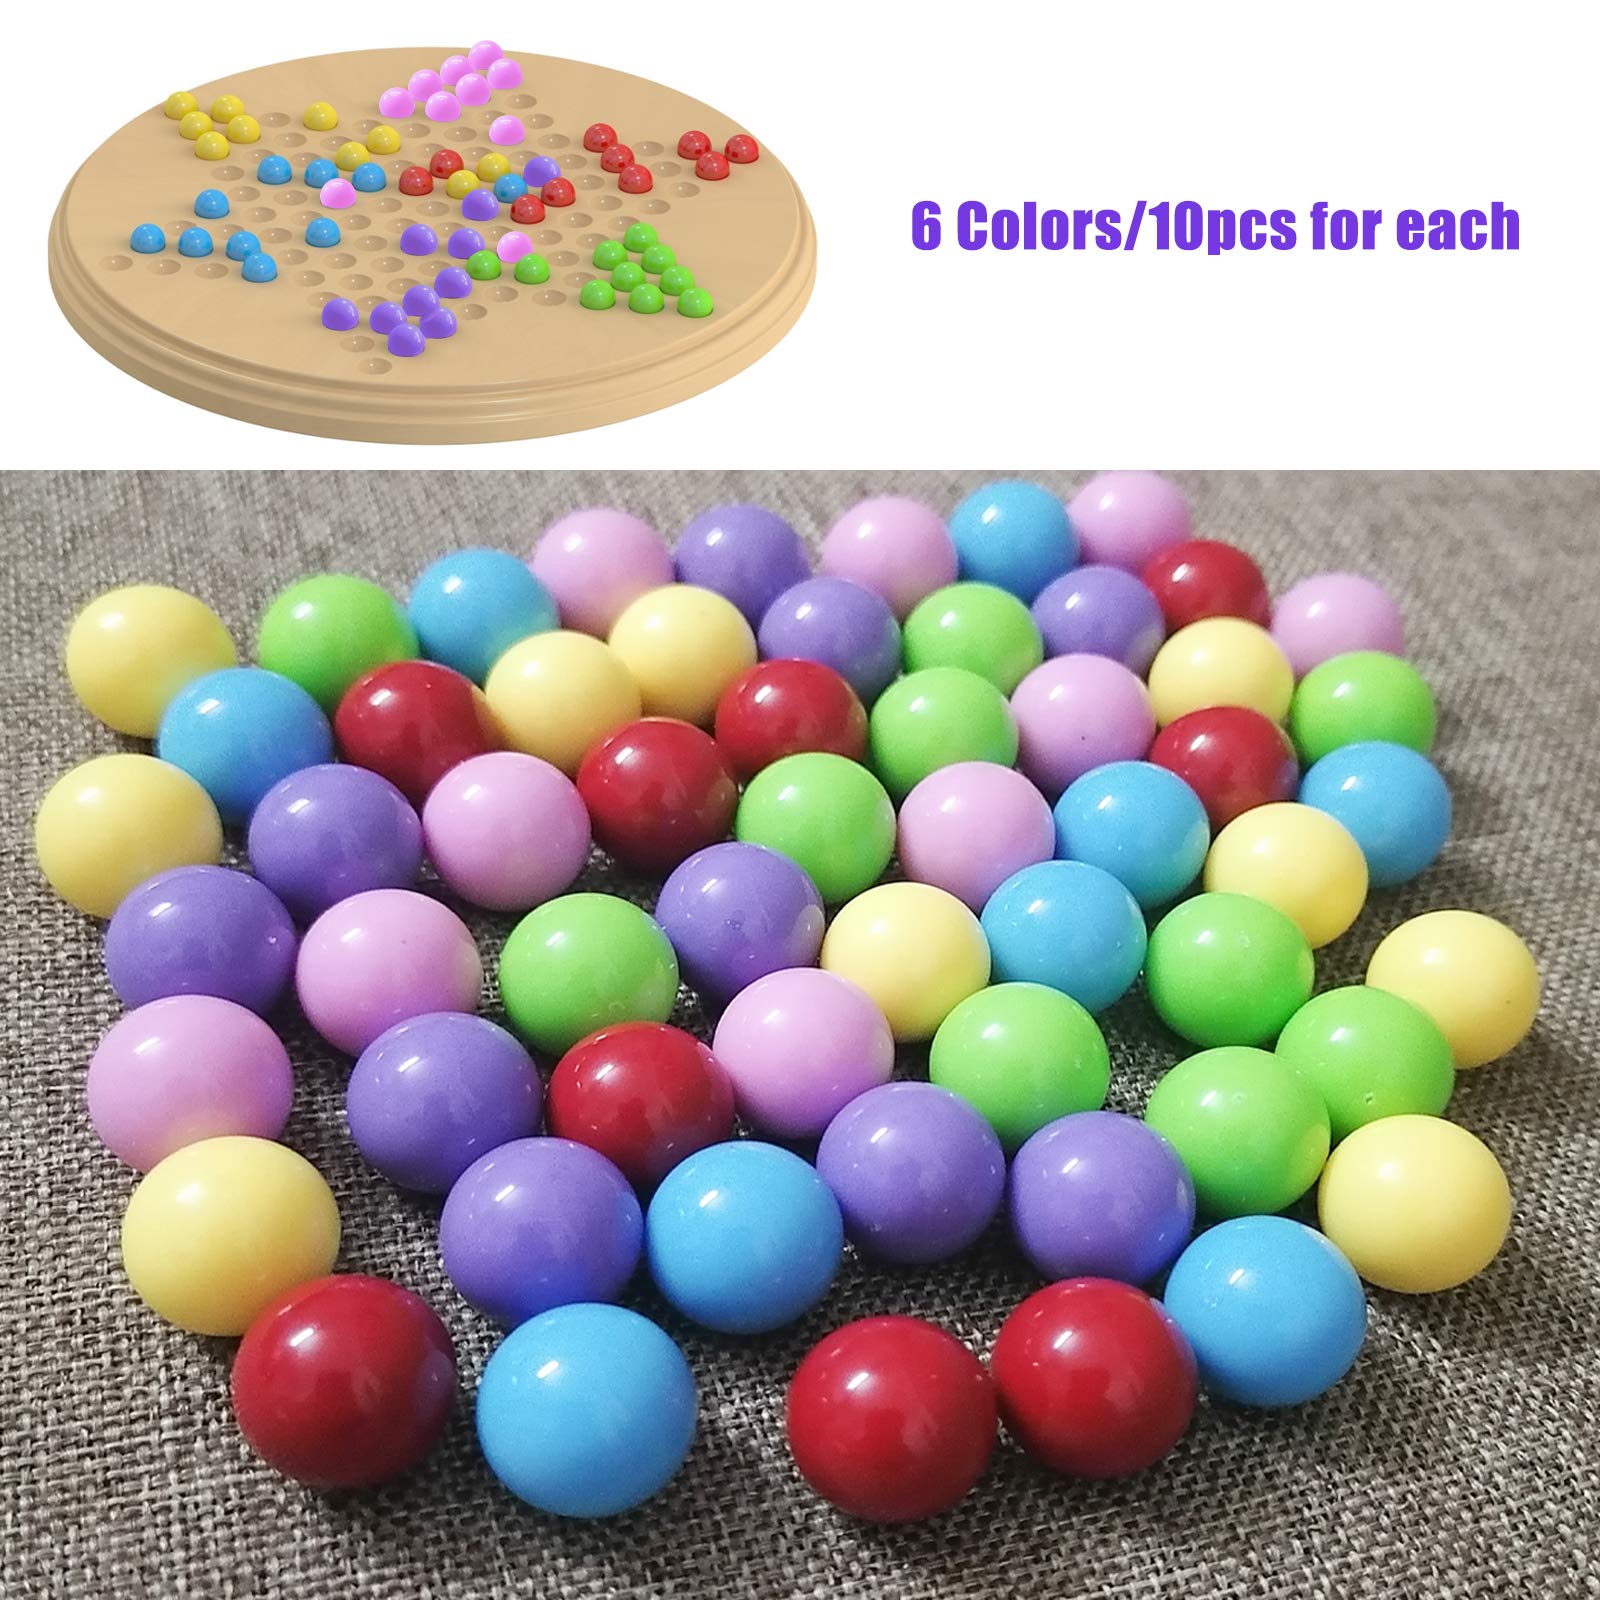 Hotusi 60 Pcs Chinese Checkers Marbles Balls in 6 Colors,14mm Game Replacement Marbles Balls for Marble Run, Marbles Game